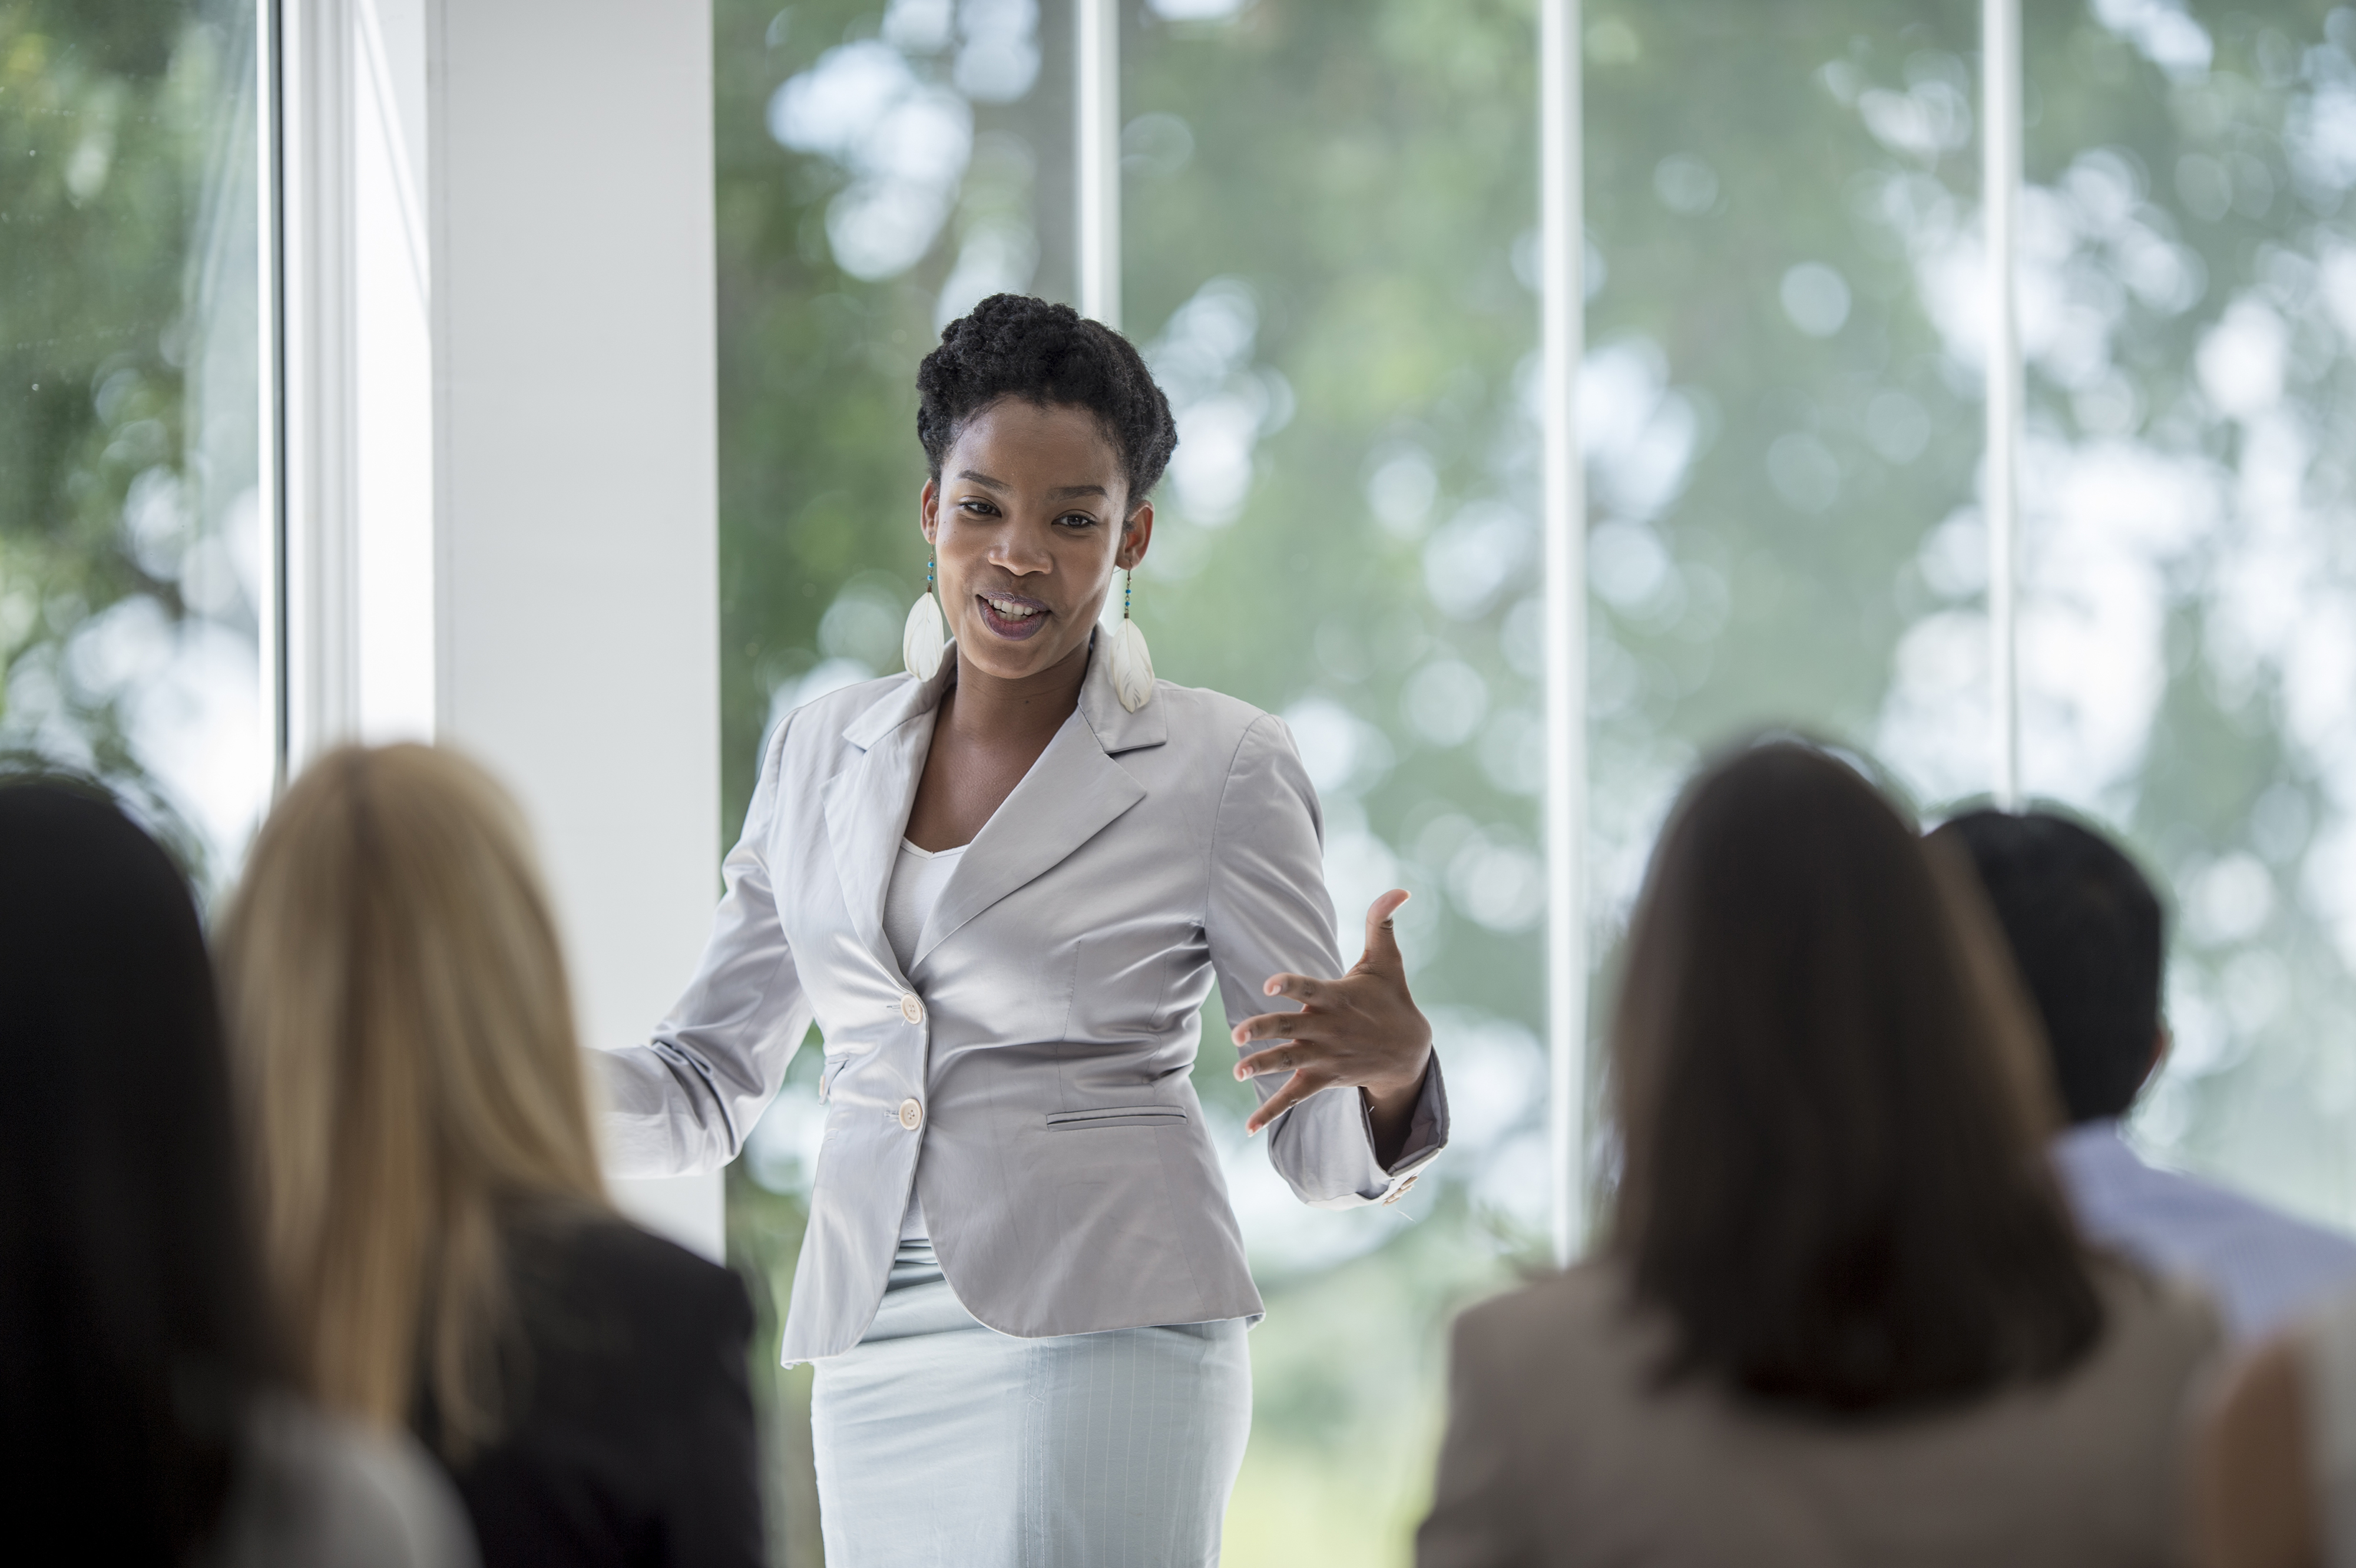 Women in Leadership and Their Well-Being